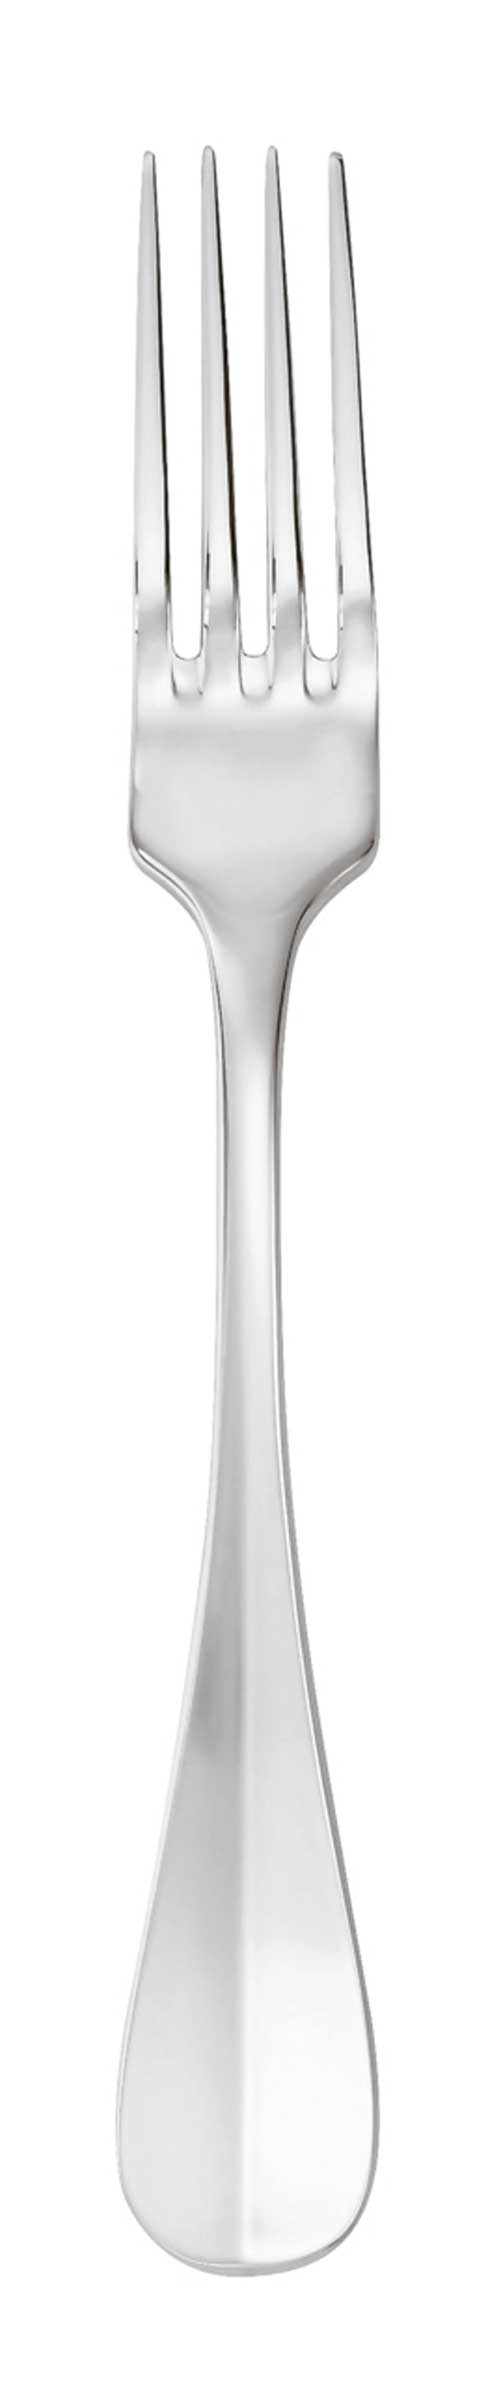 $36.00 Table Fork Silverplated on 18/10 s/s